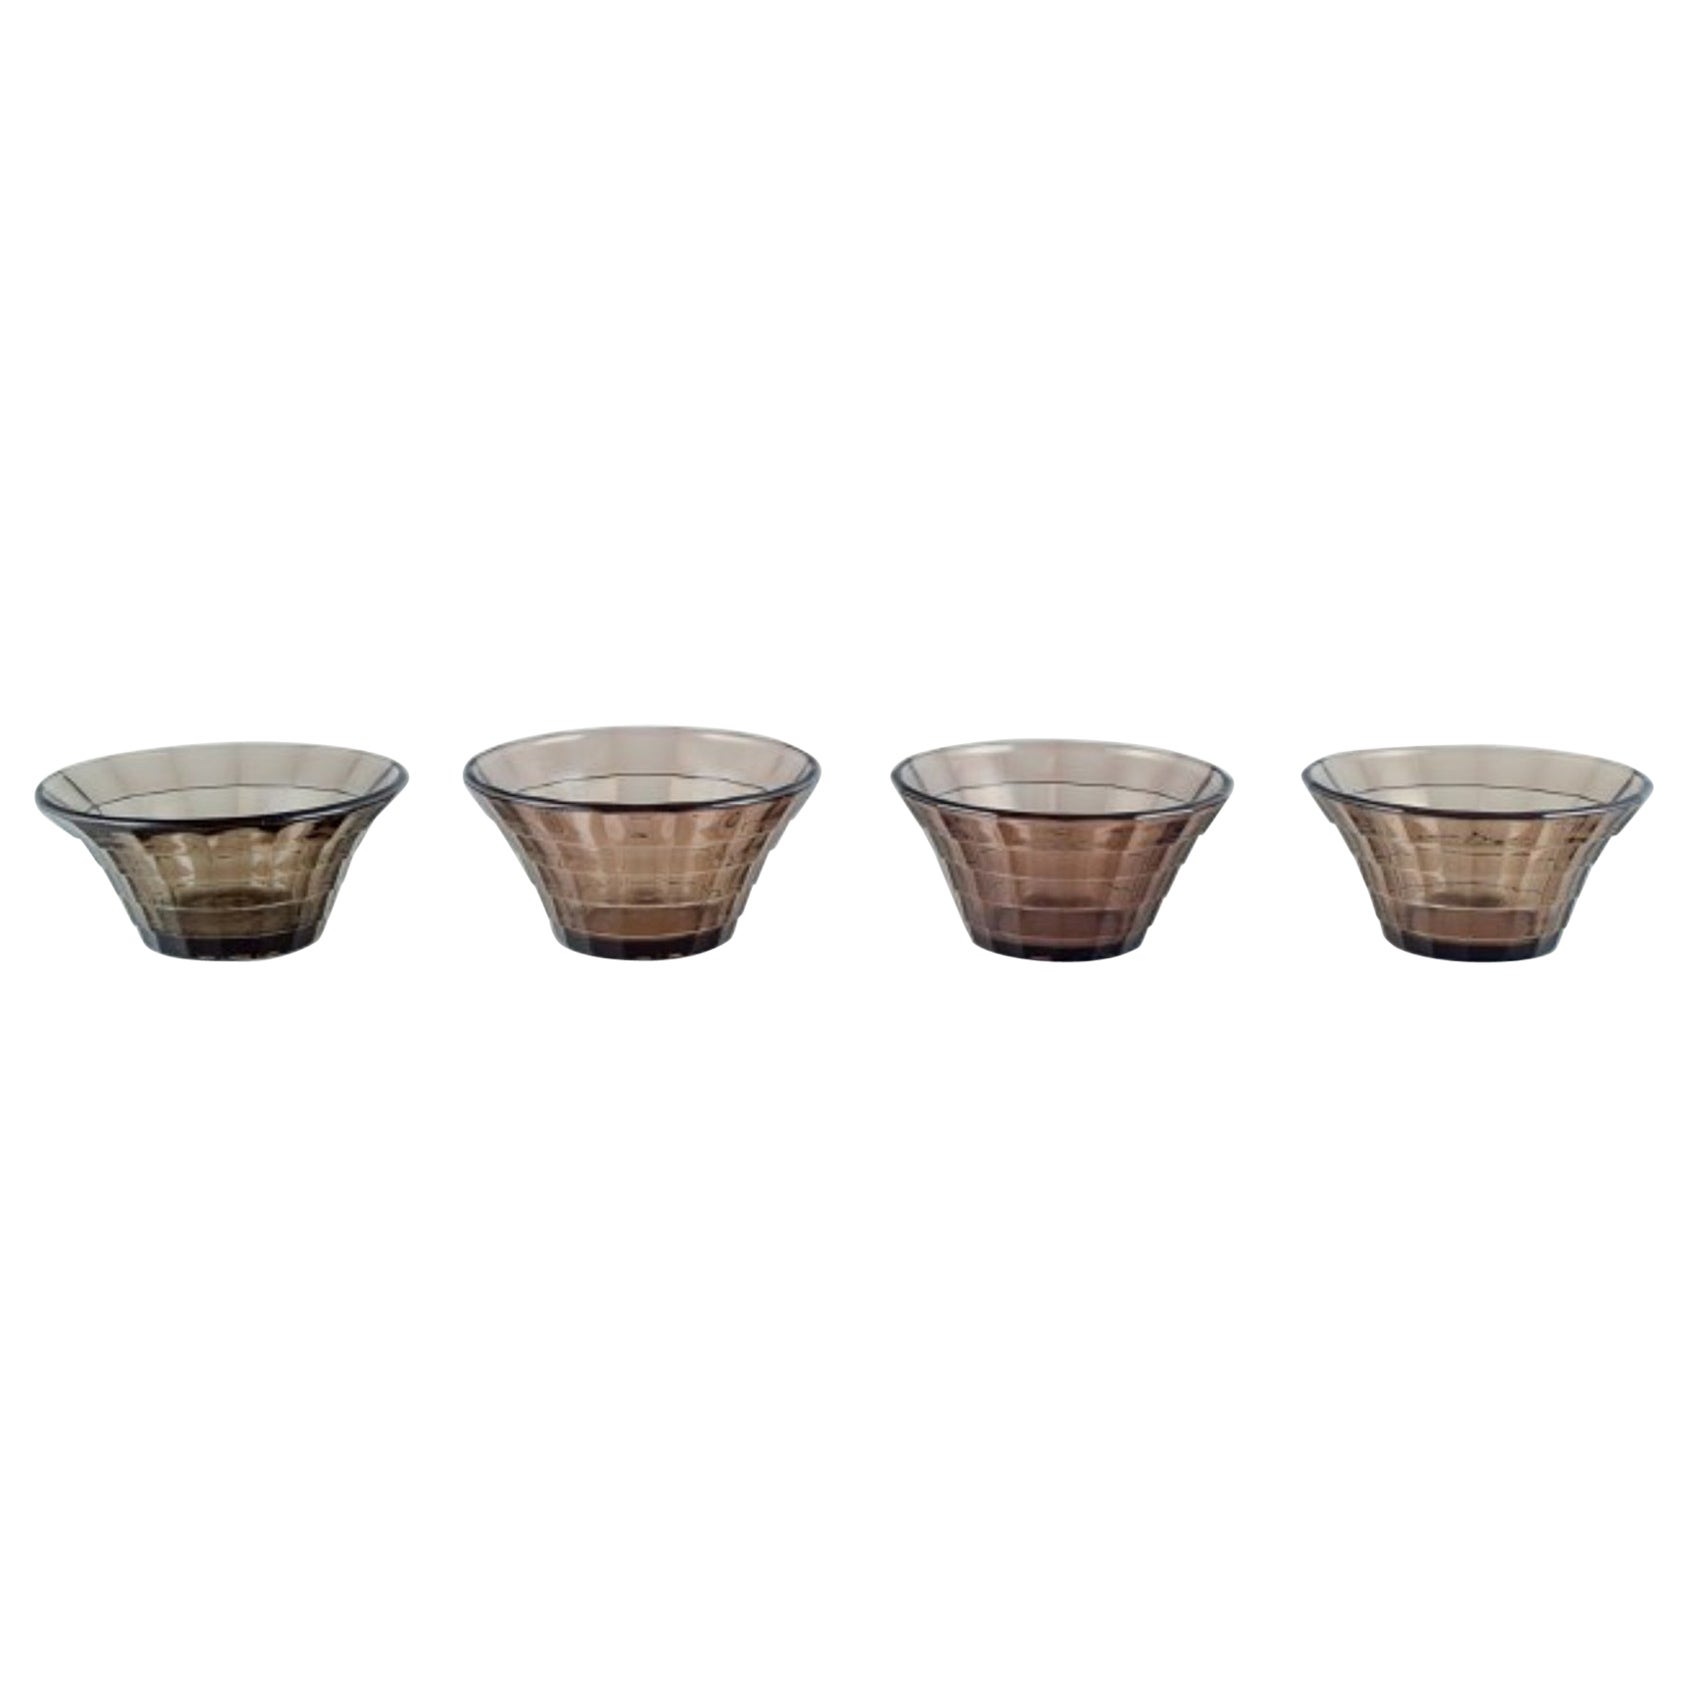 Simon Gate for Orrefors/Sandvik. Four bowls in smoked-coloured pressed glass For Sale